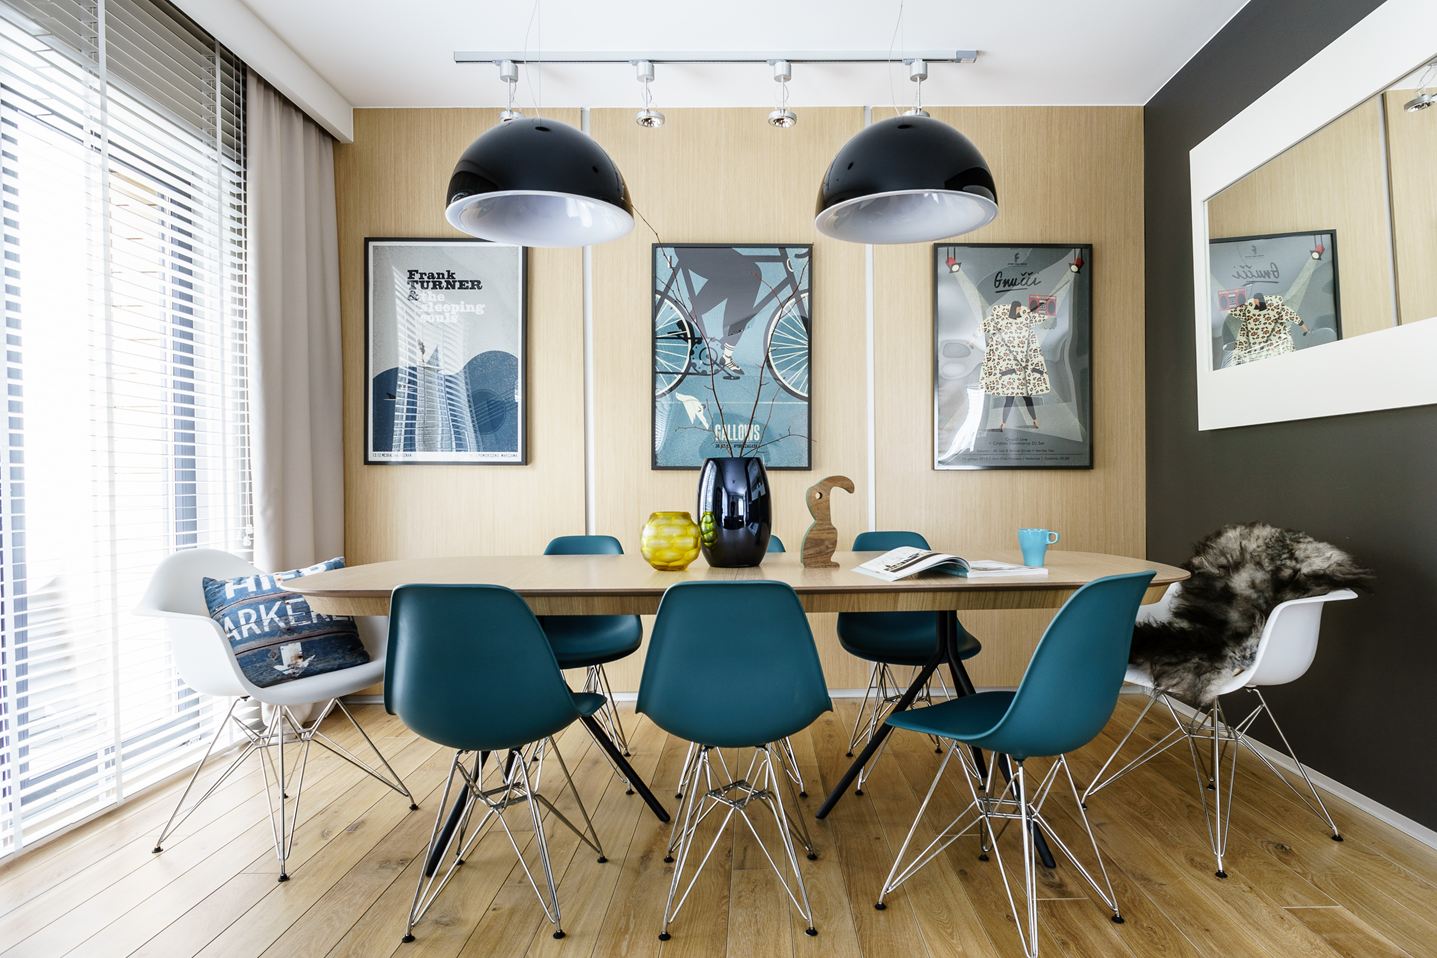 Modern Dining Room Designs Combined With Scandinavian Style Brings